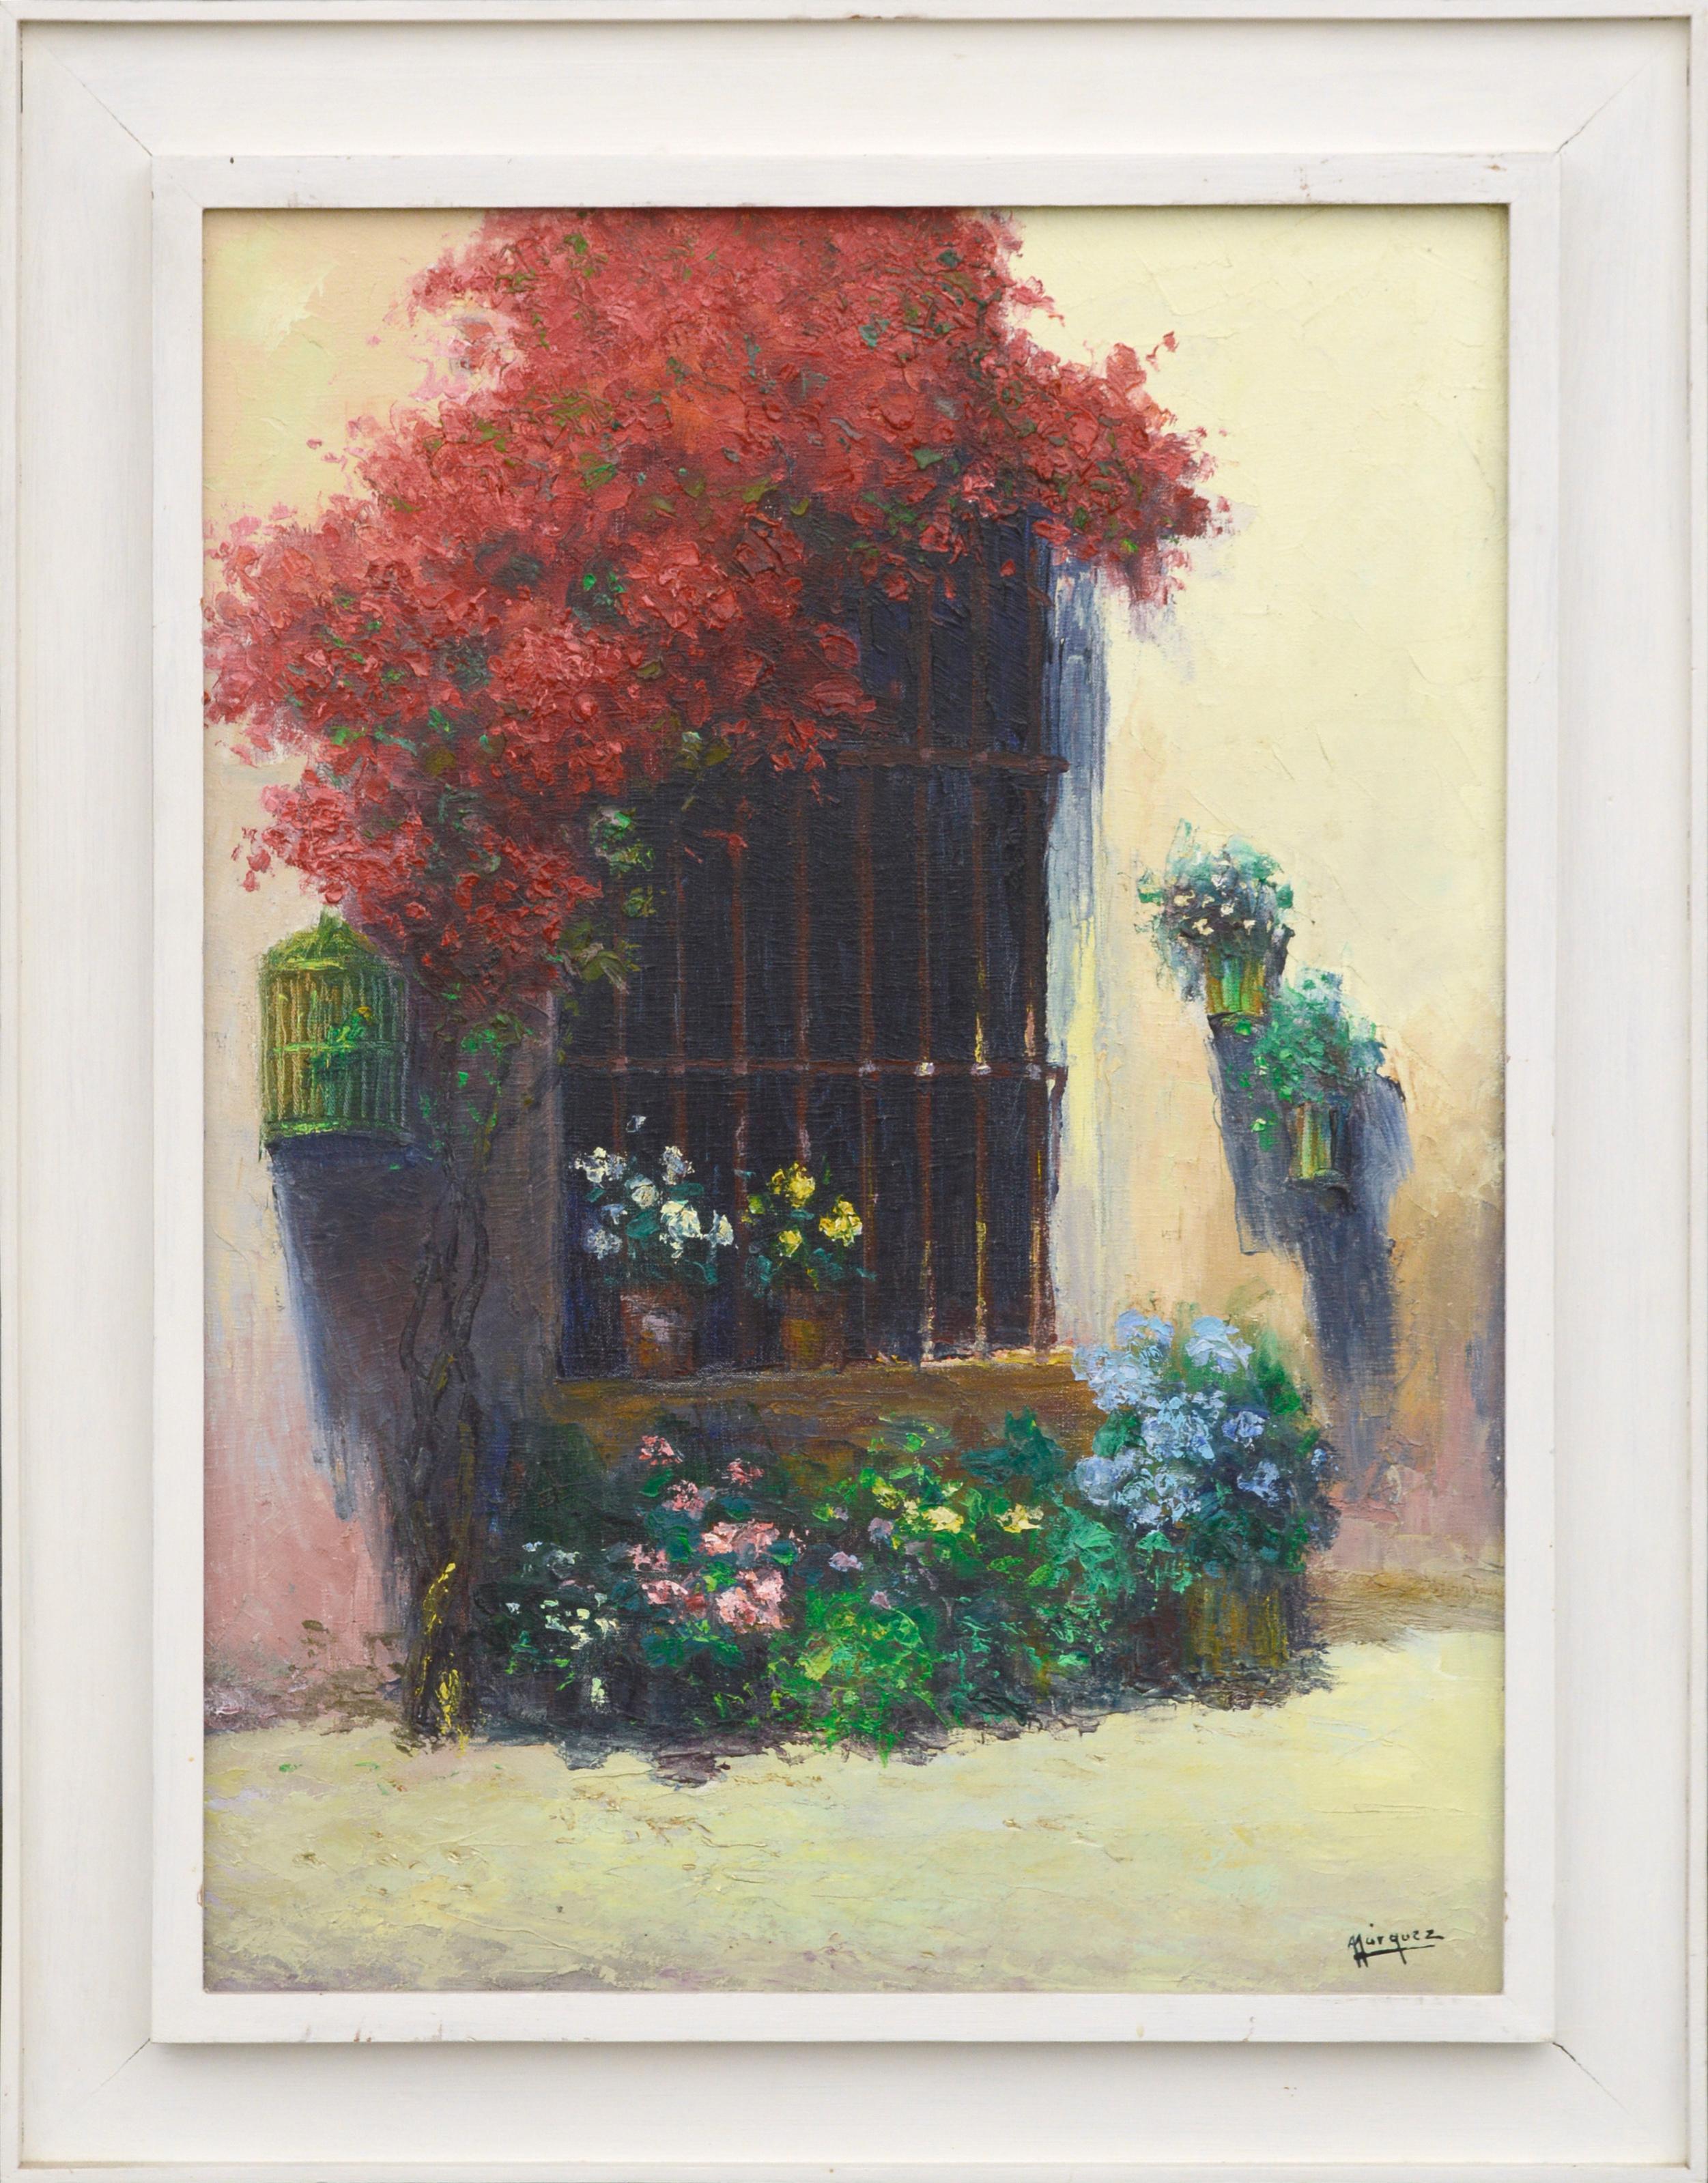 A. Marquez Landscape Painting - "Ventana" - Bougainvillea and Flowers Around a Window